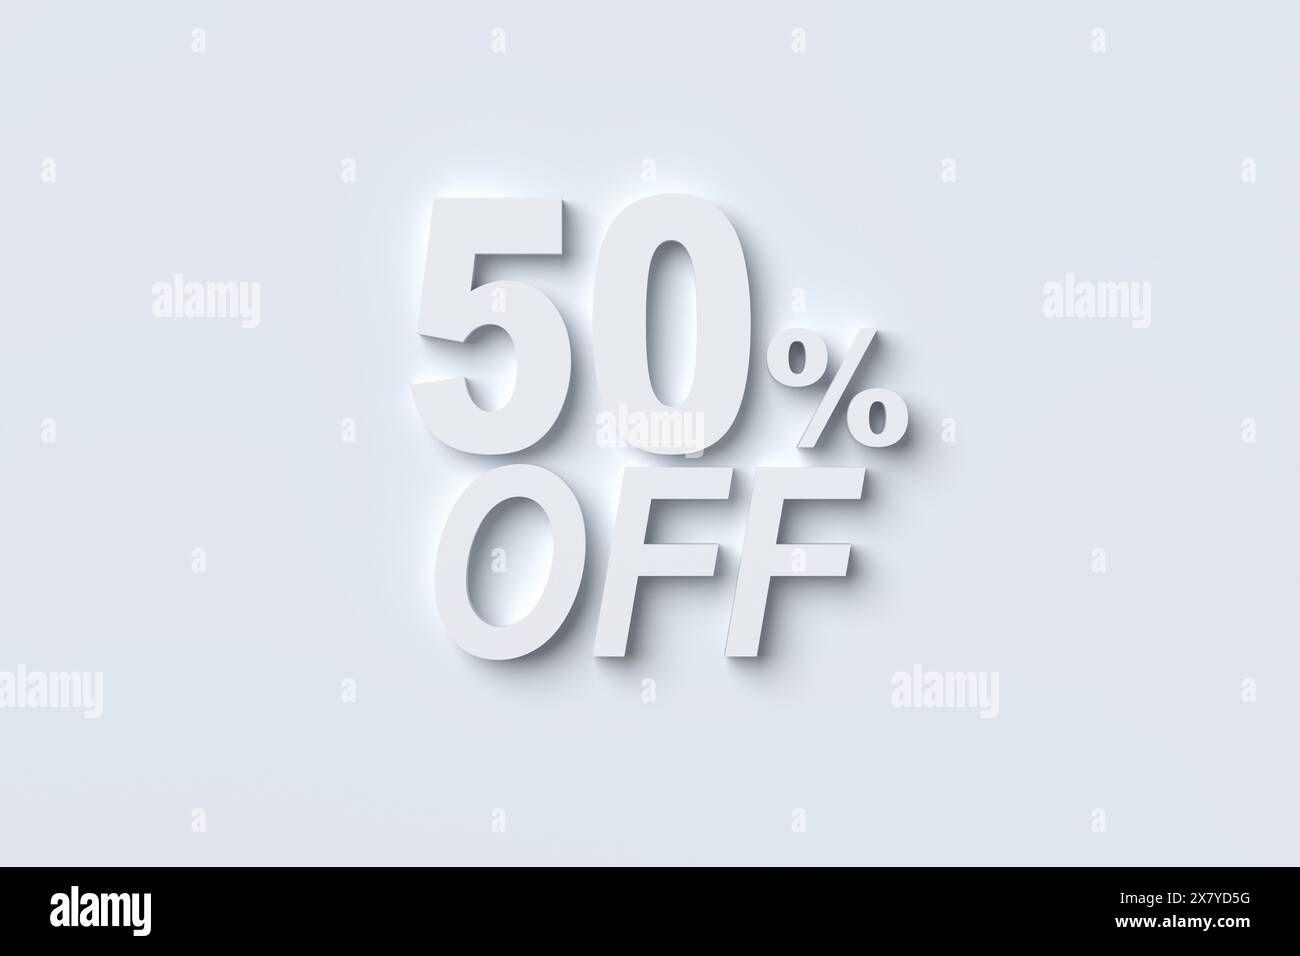 50 percent discount or sale offer banner. Retail prices fifty percent off. 3D rendering. Stock Photo